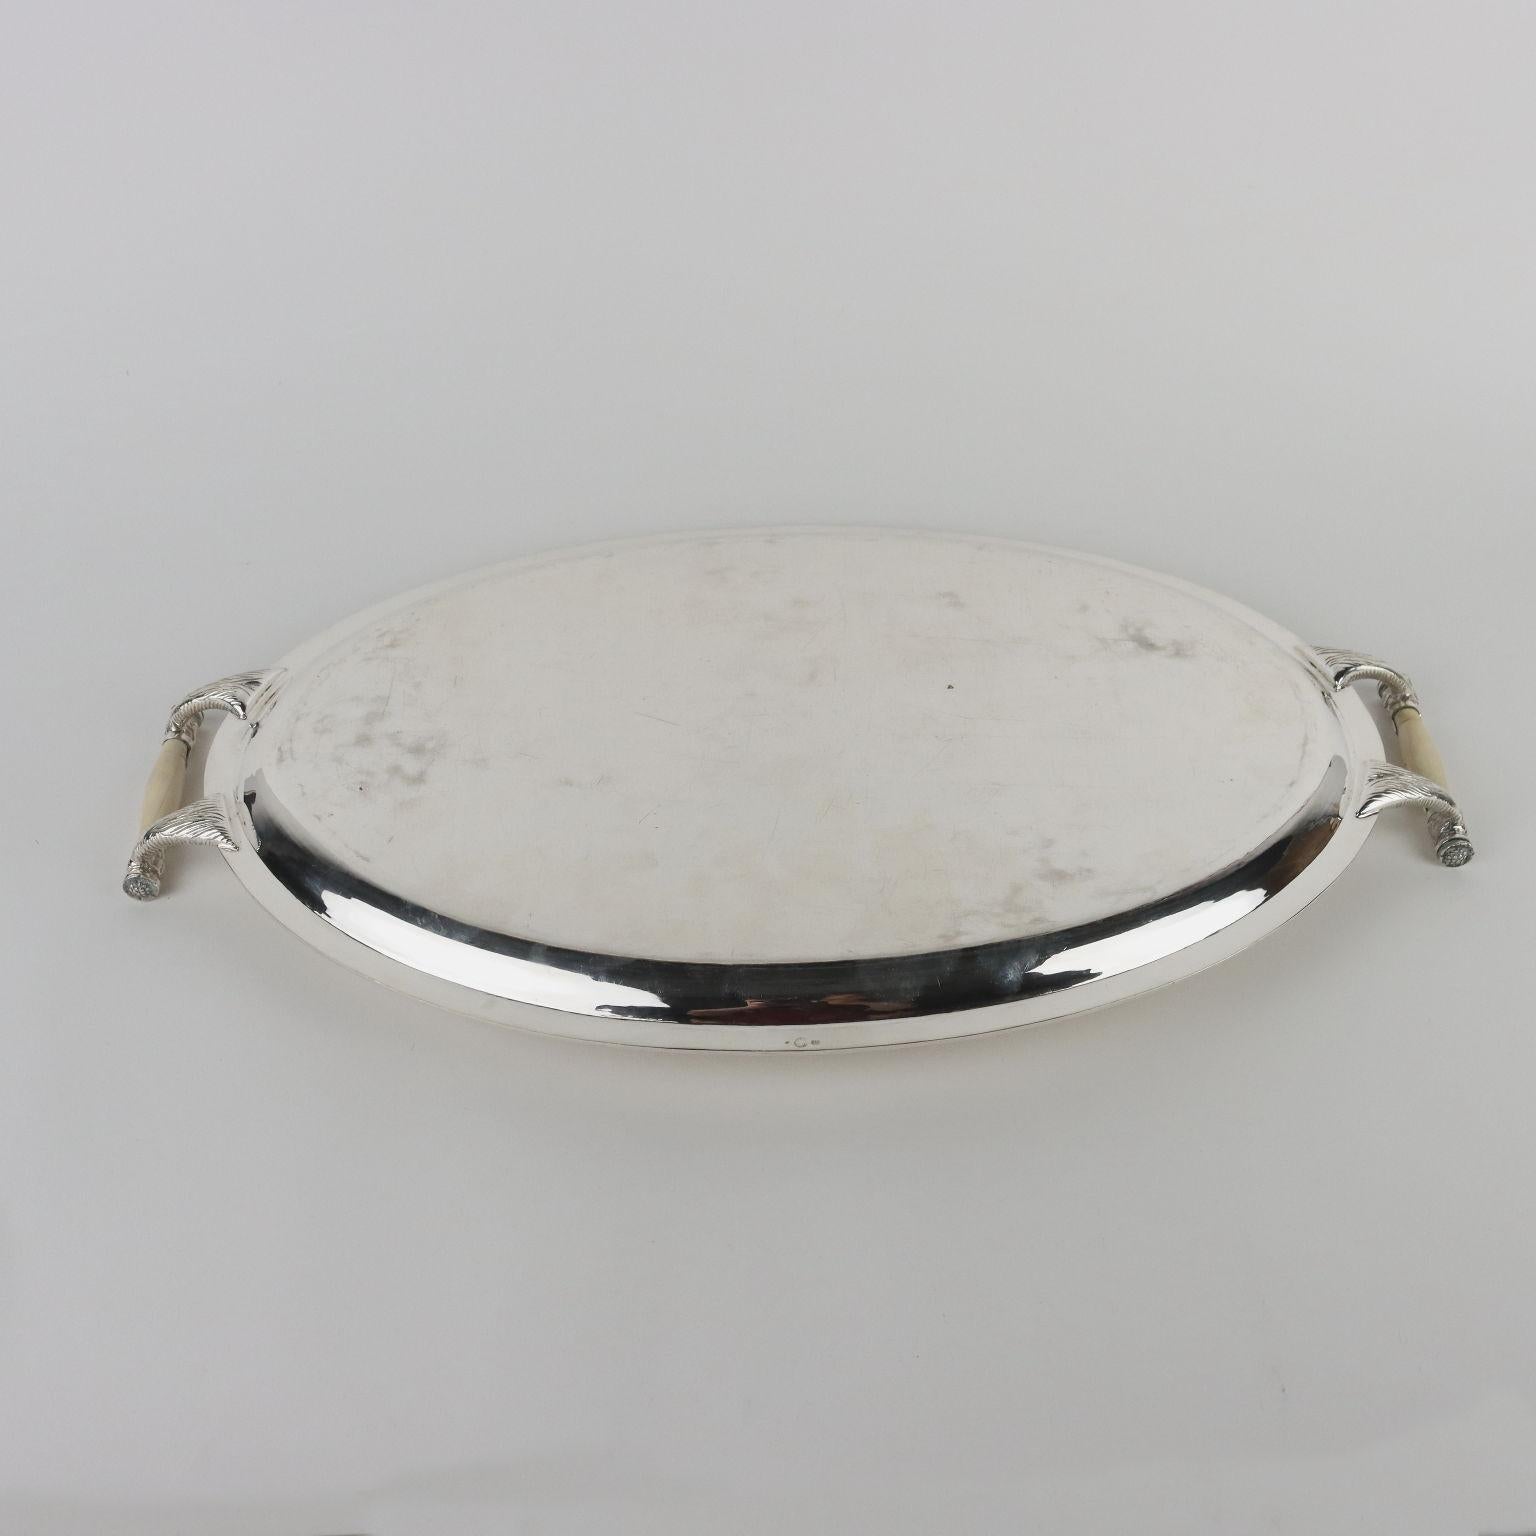 Messulam Milan Silver Tray Mid 1900s ca For Sale 1